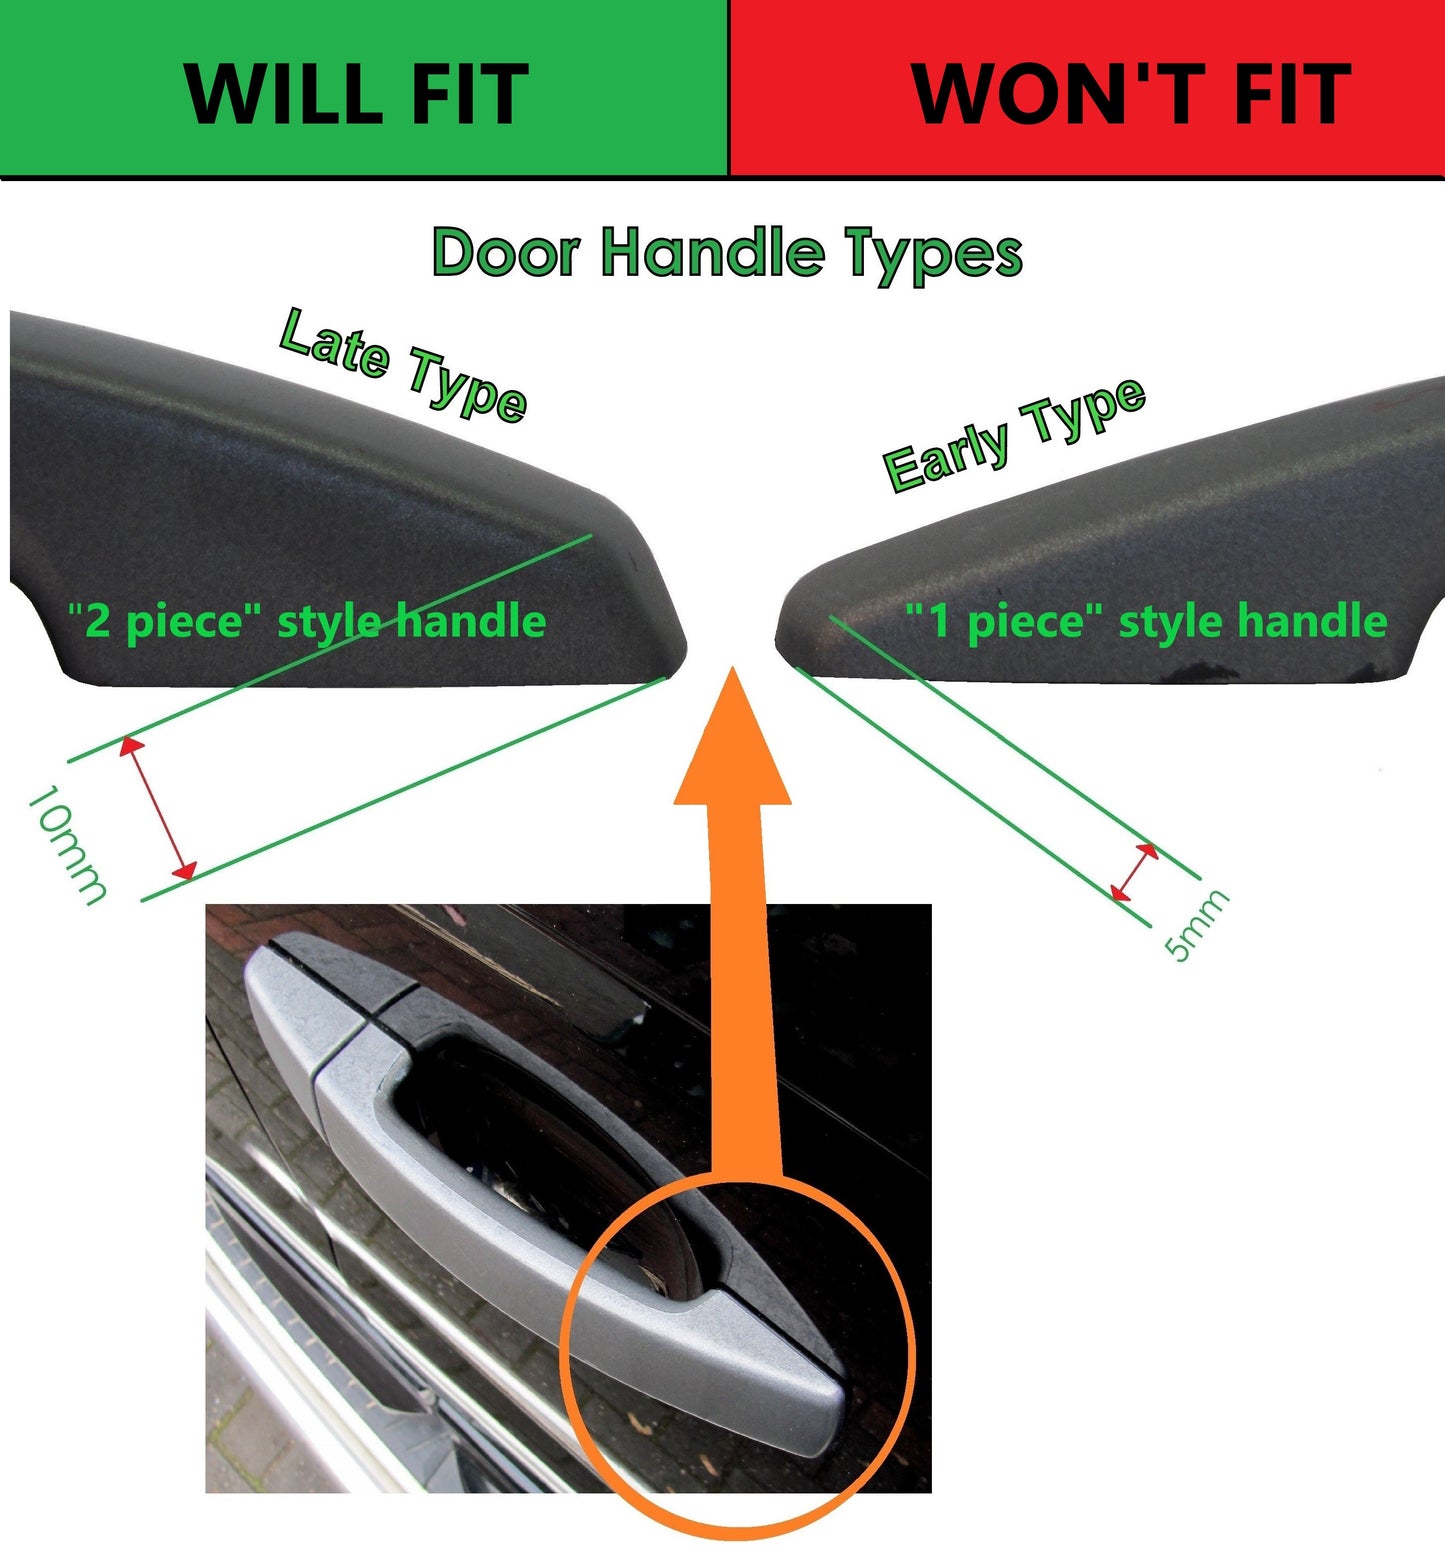 Door Handle "Skins" for Land Rover Discovery 3 fitted with 2 pc Handle - Santorini Black